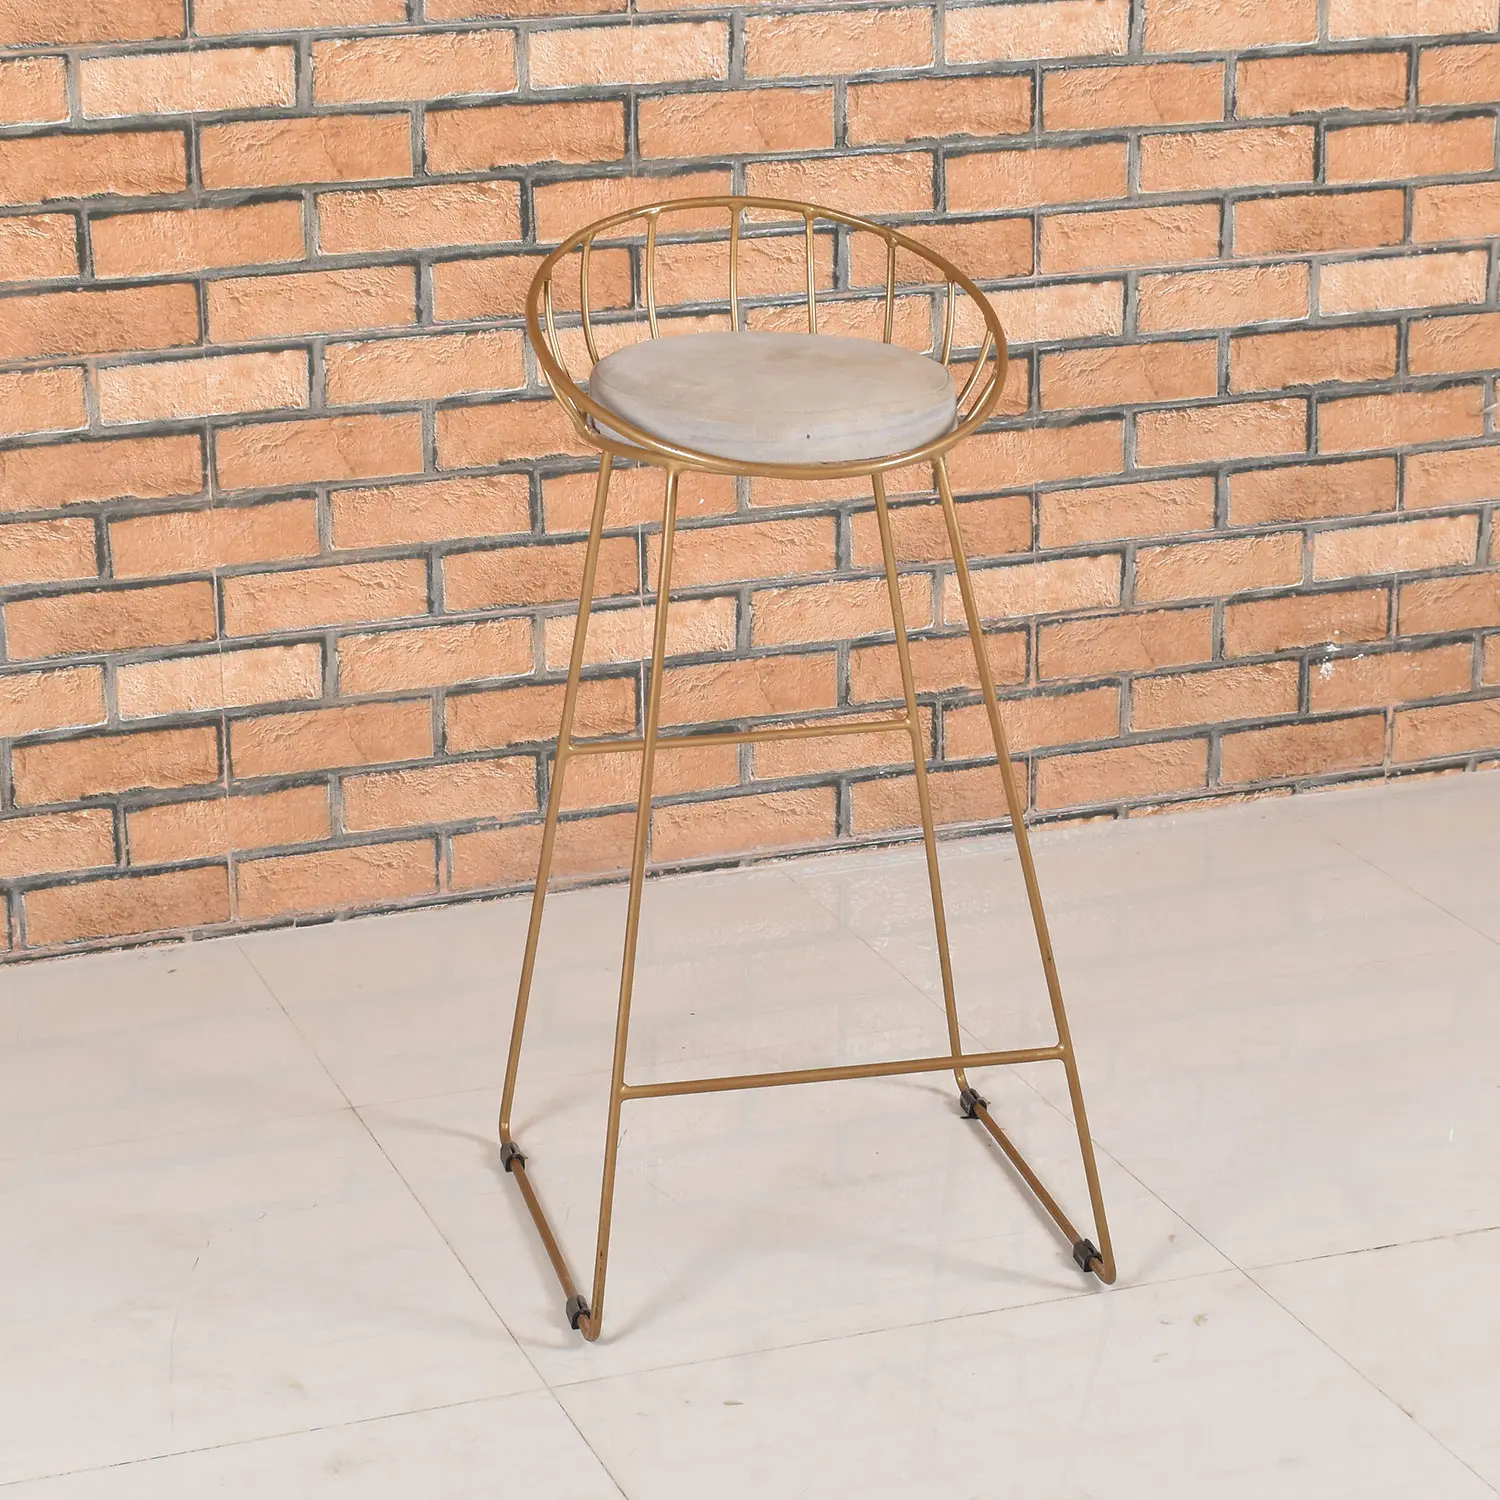 Iron Bar Chair with Cusion Seat - popular handicrafts